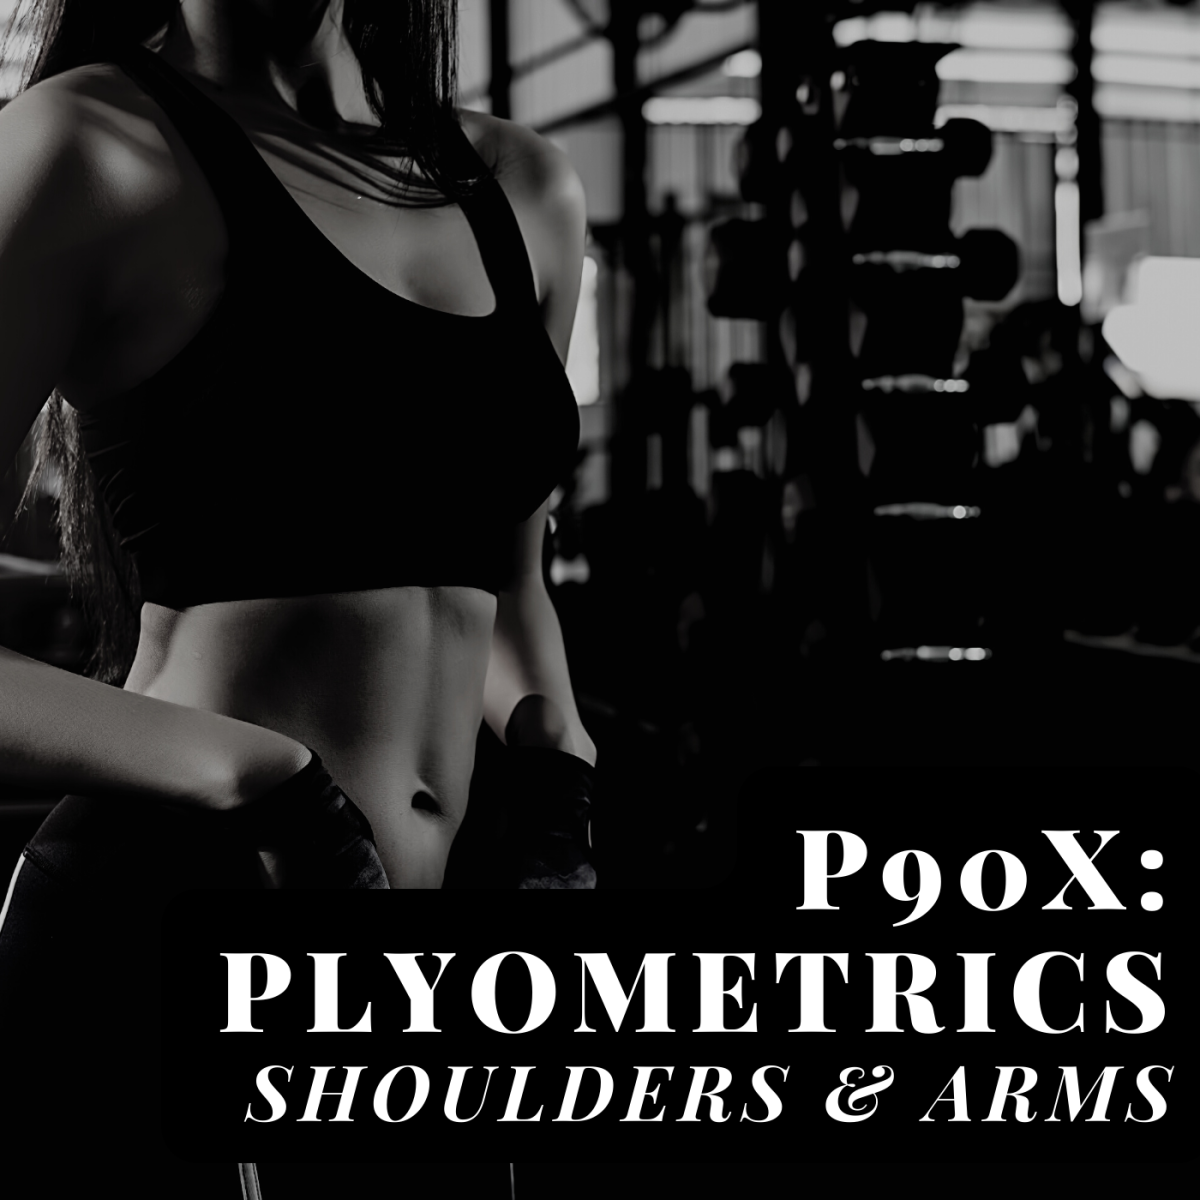 A review of the shoulders and arms part of P90X: Plyometrics